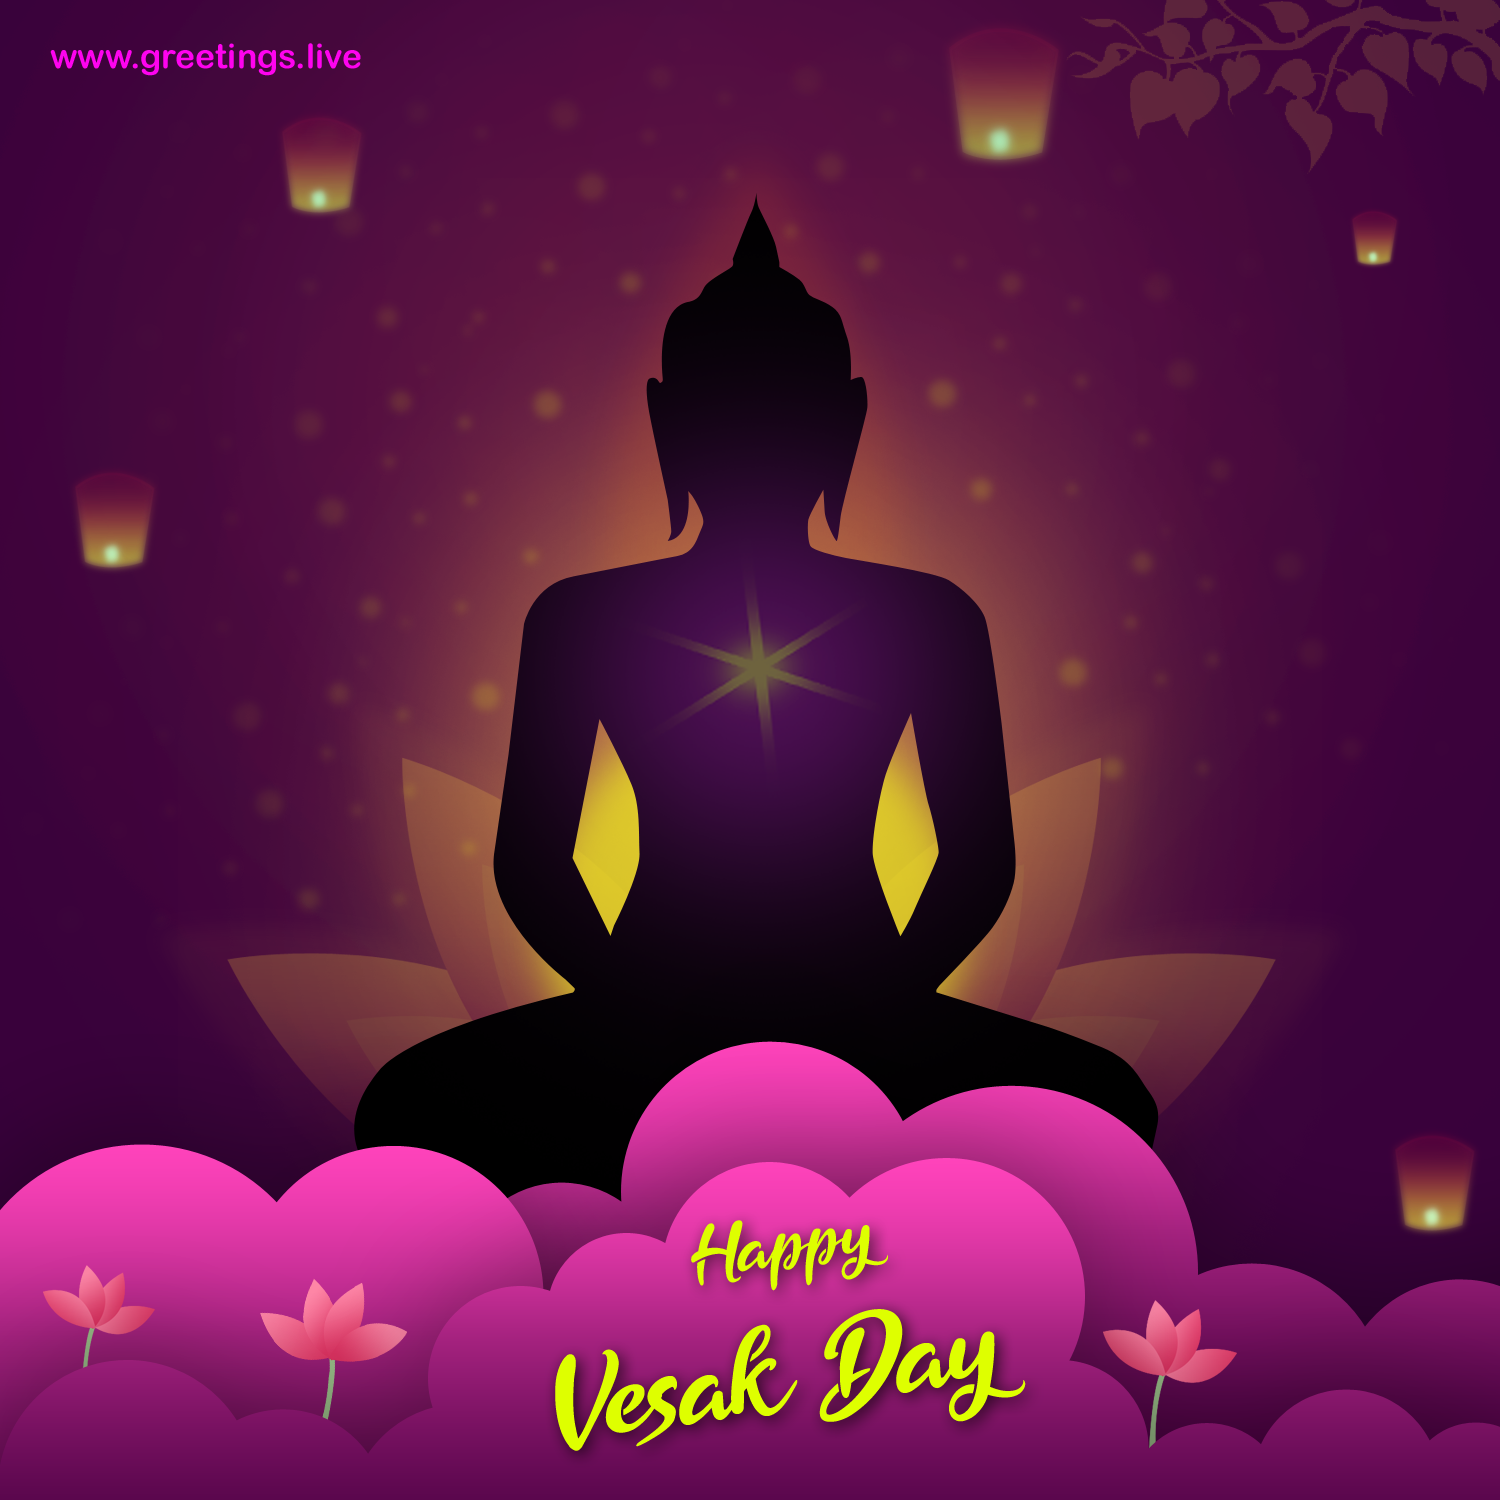 Greetings.Live*Free Daily Greetings Pictures Festival GIF Images Vesak